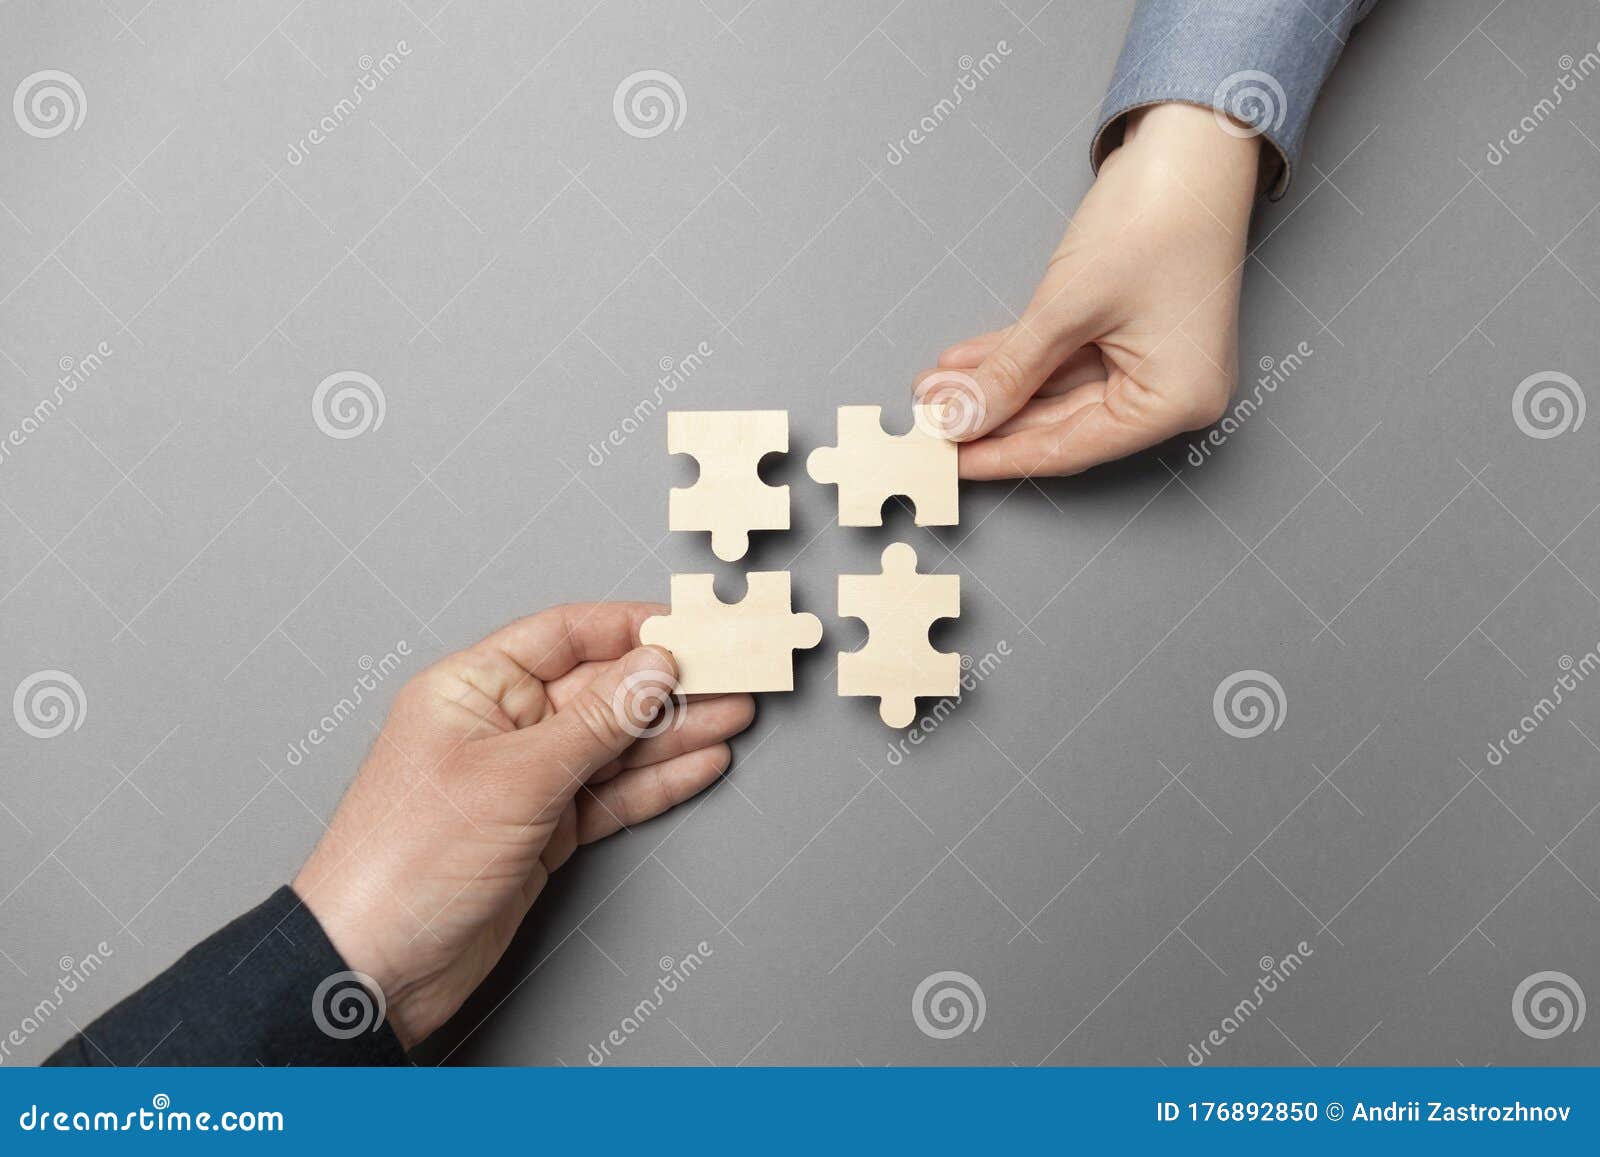 two hands connect puzzles on a grey background. cooperation and teamwork in business. collaboration people for success